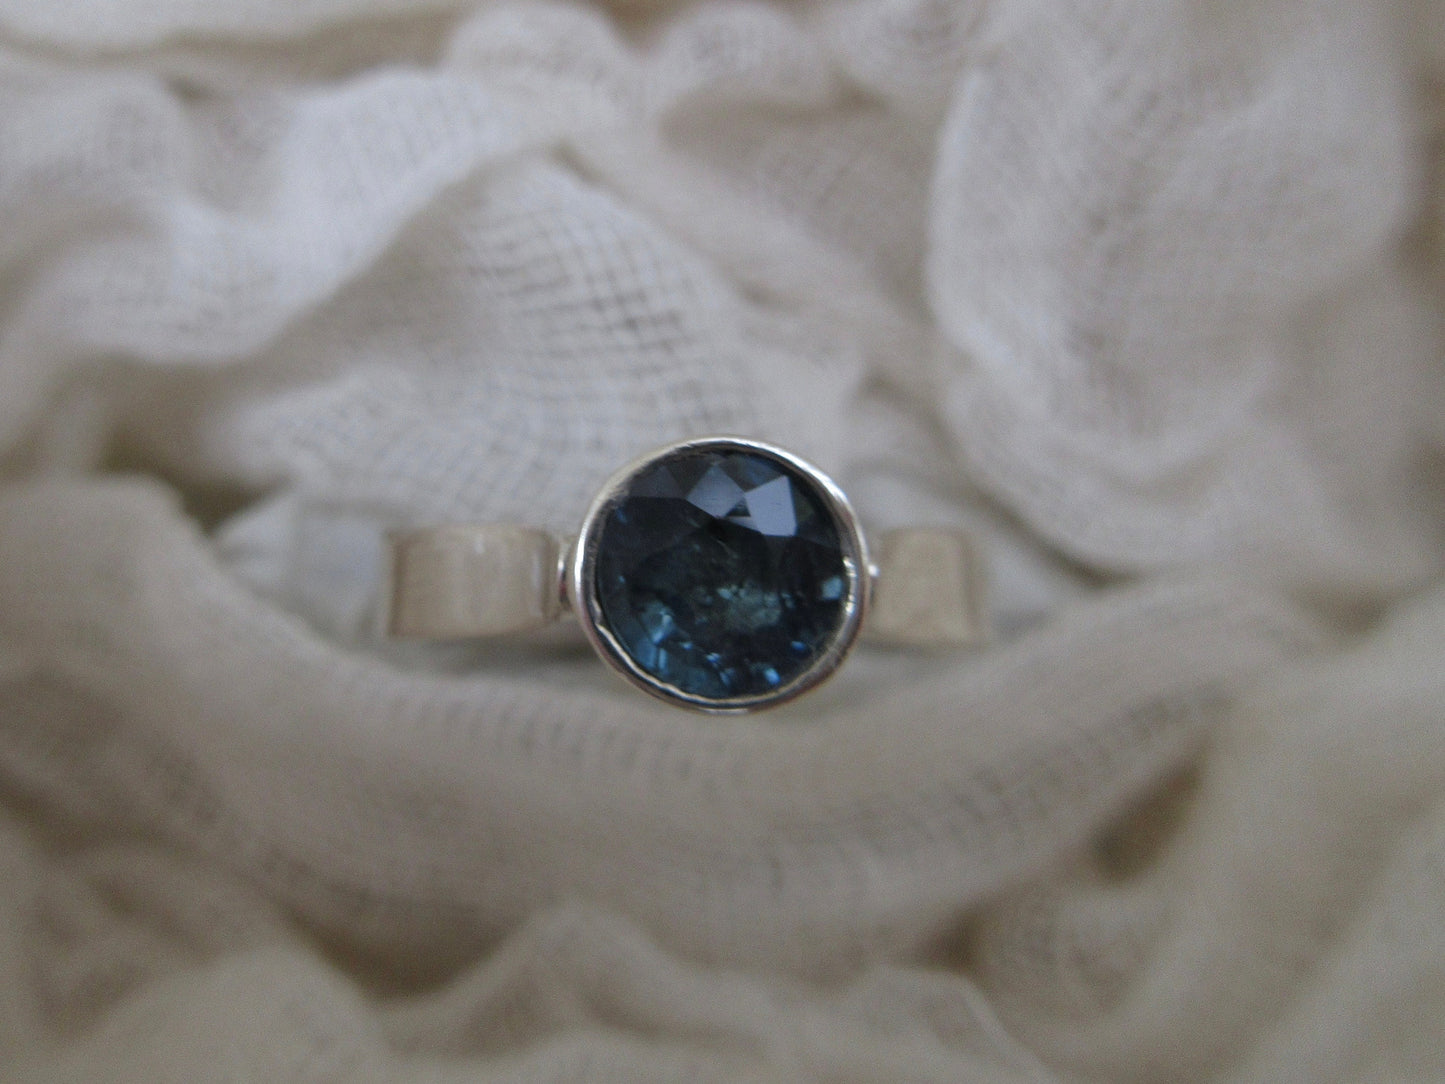 Starlight ring in argentium sterling silver with a natural light blue sapphire